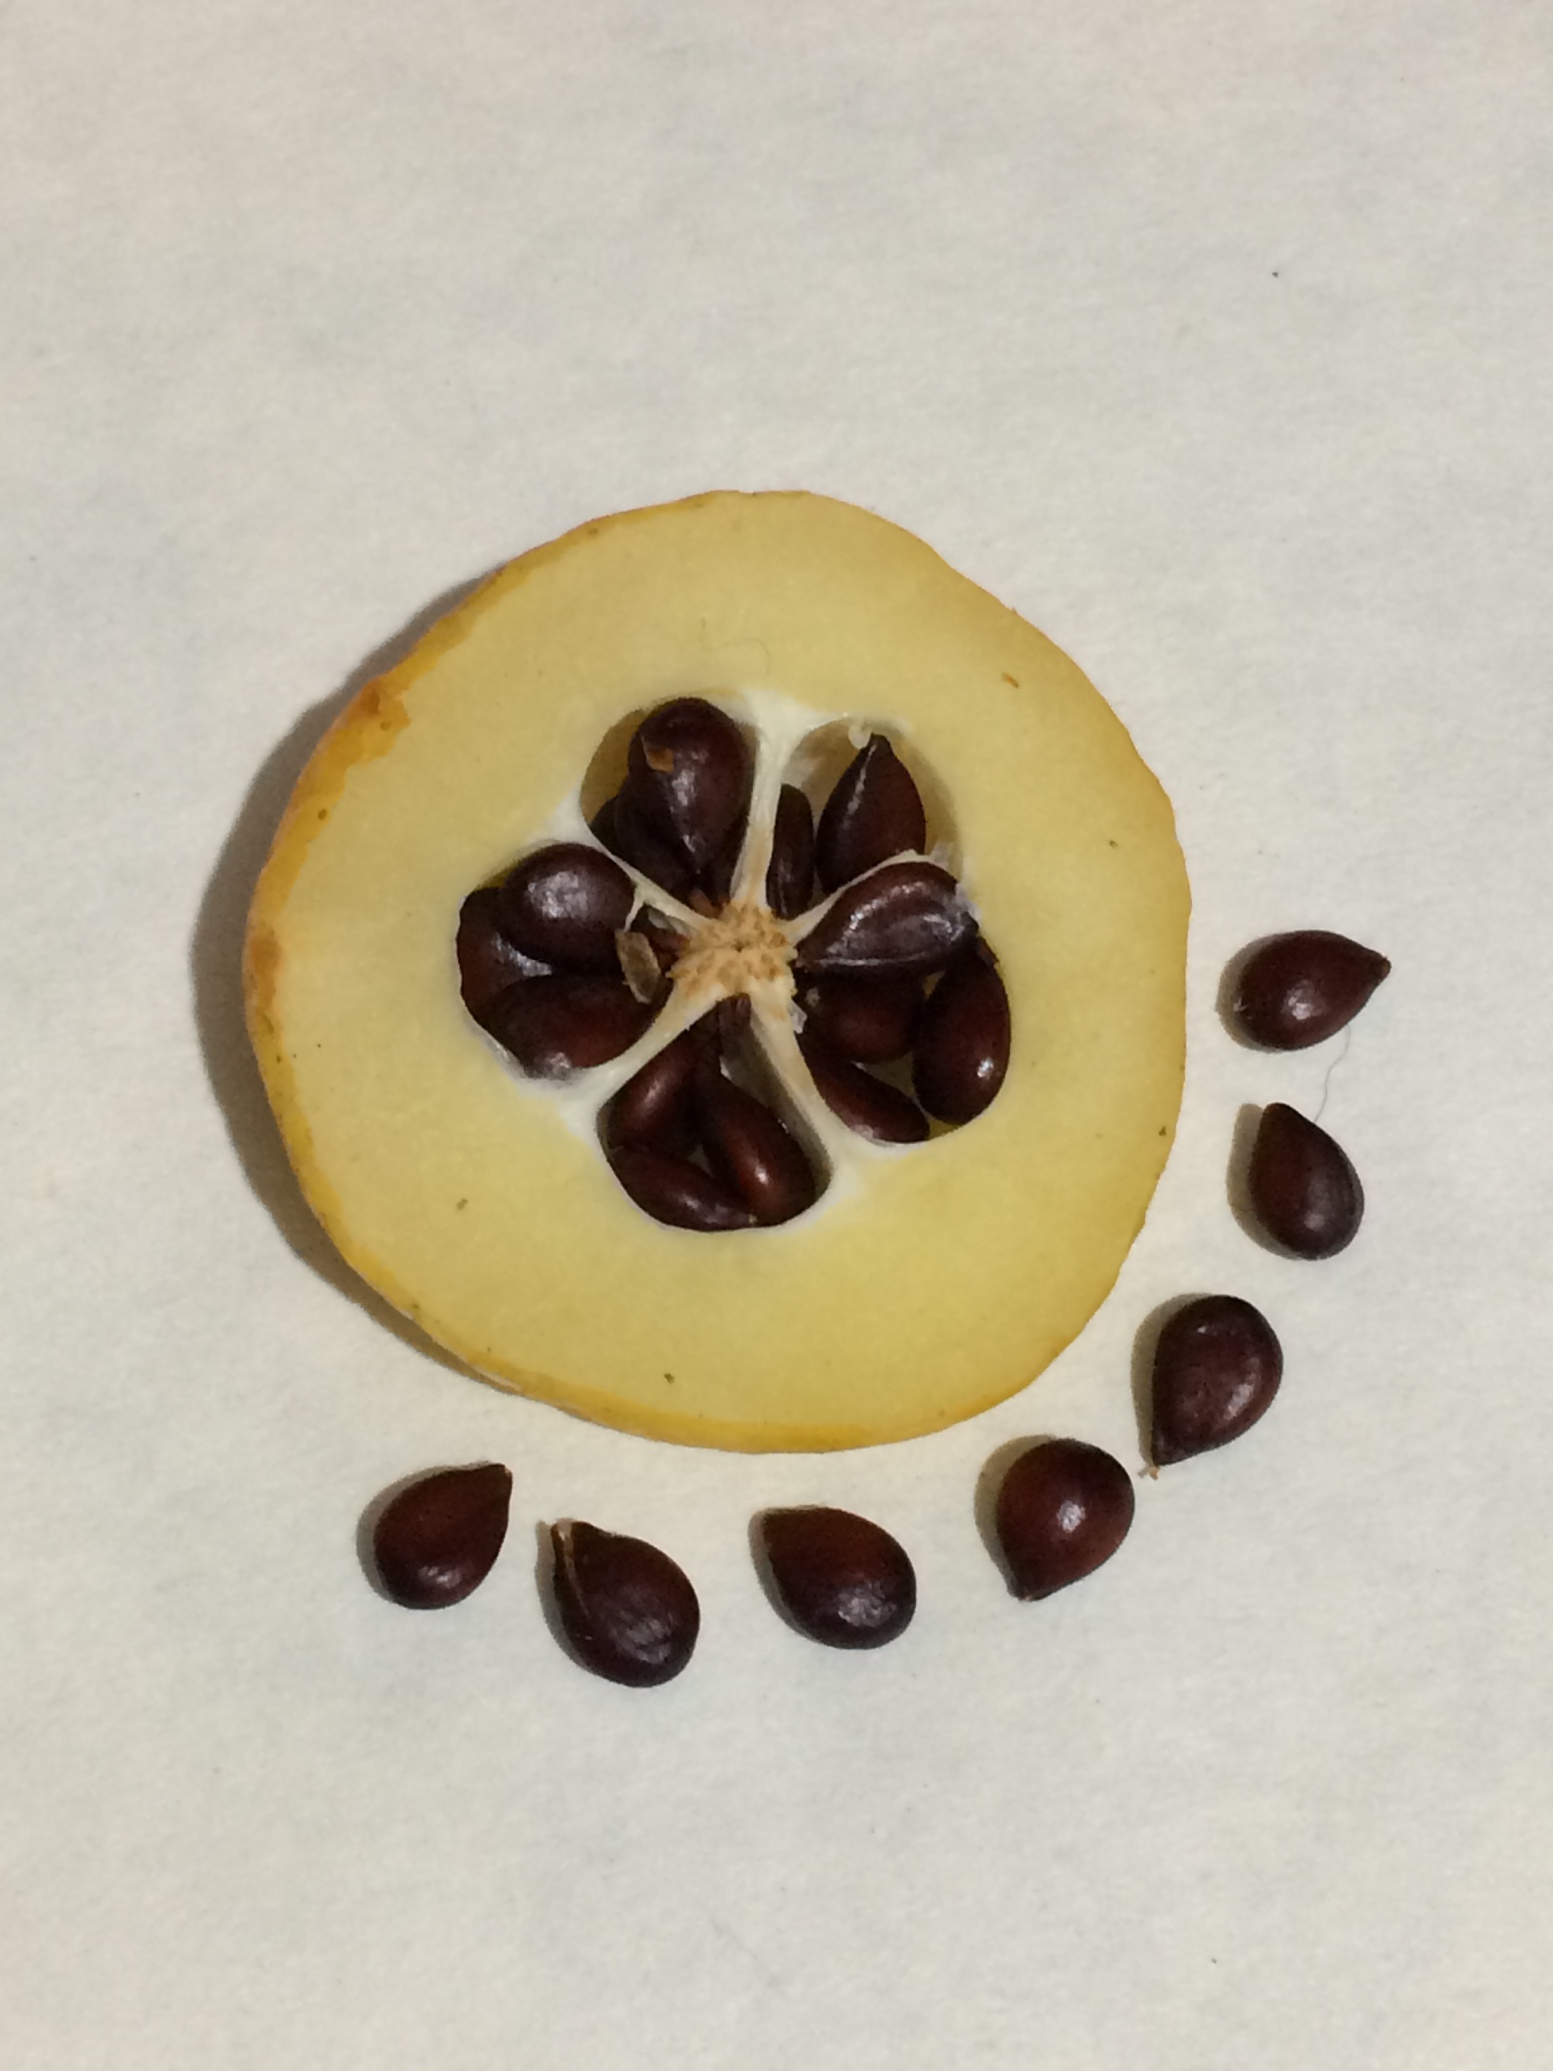  Chaenomeles japonica seed 